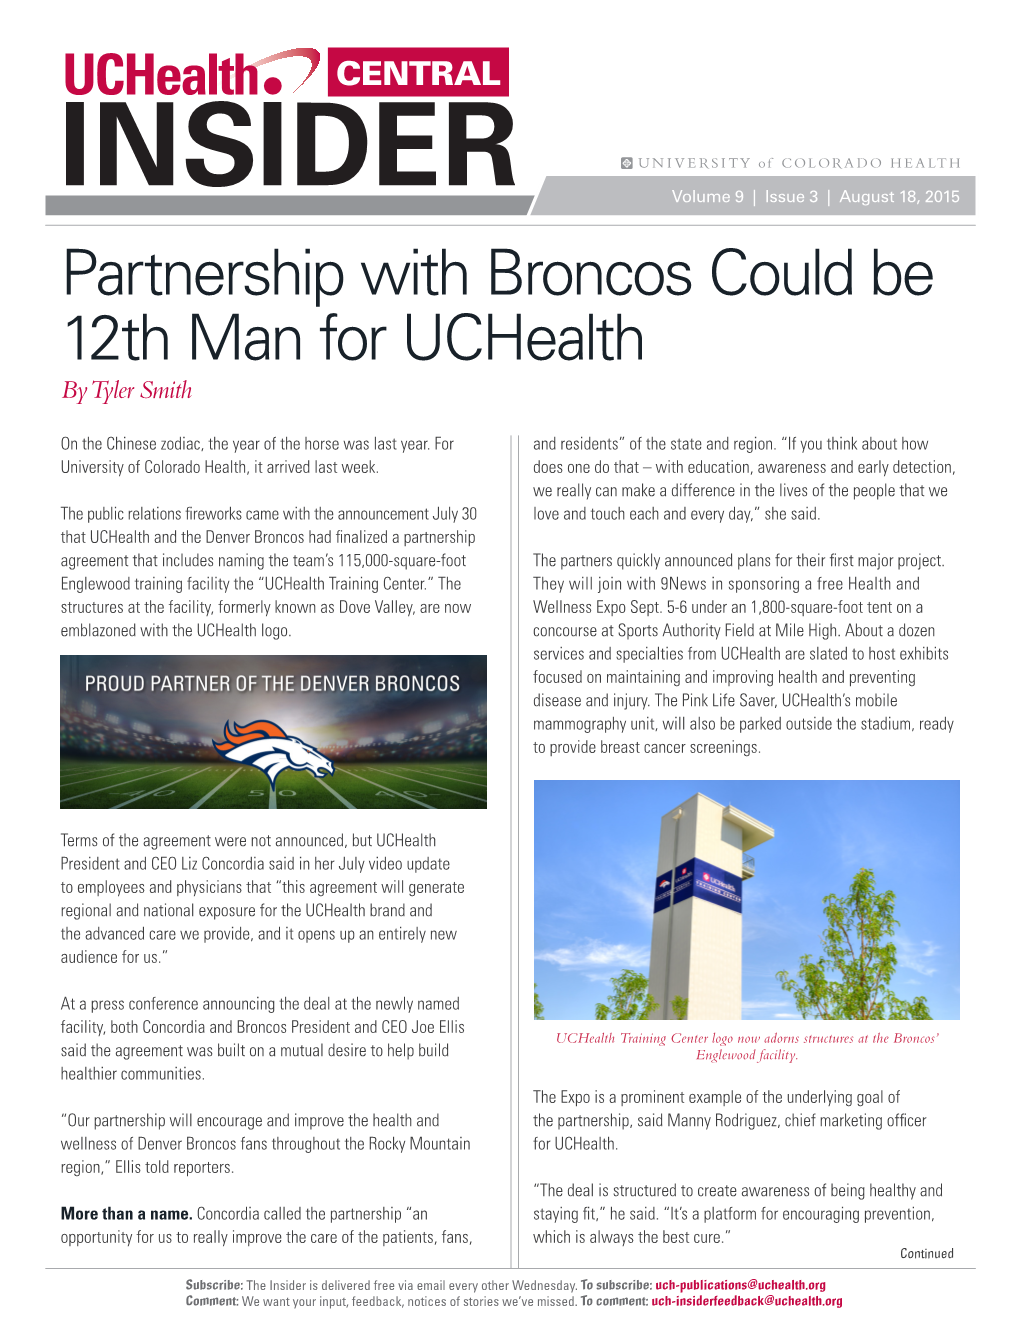 Partnership with Broncos Could Be 12Th Man for Uchealth by Tyler Smith